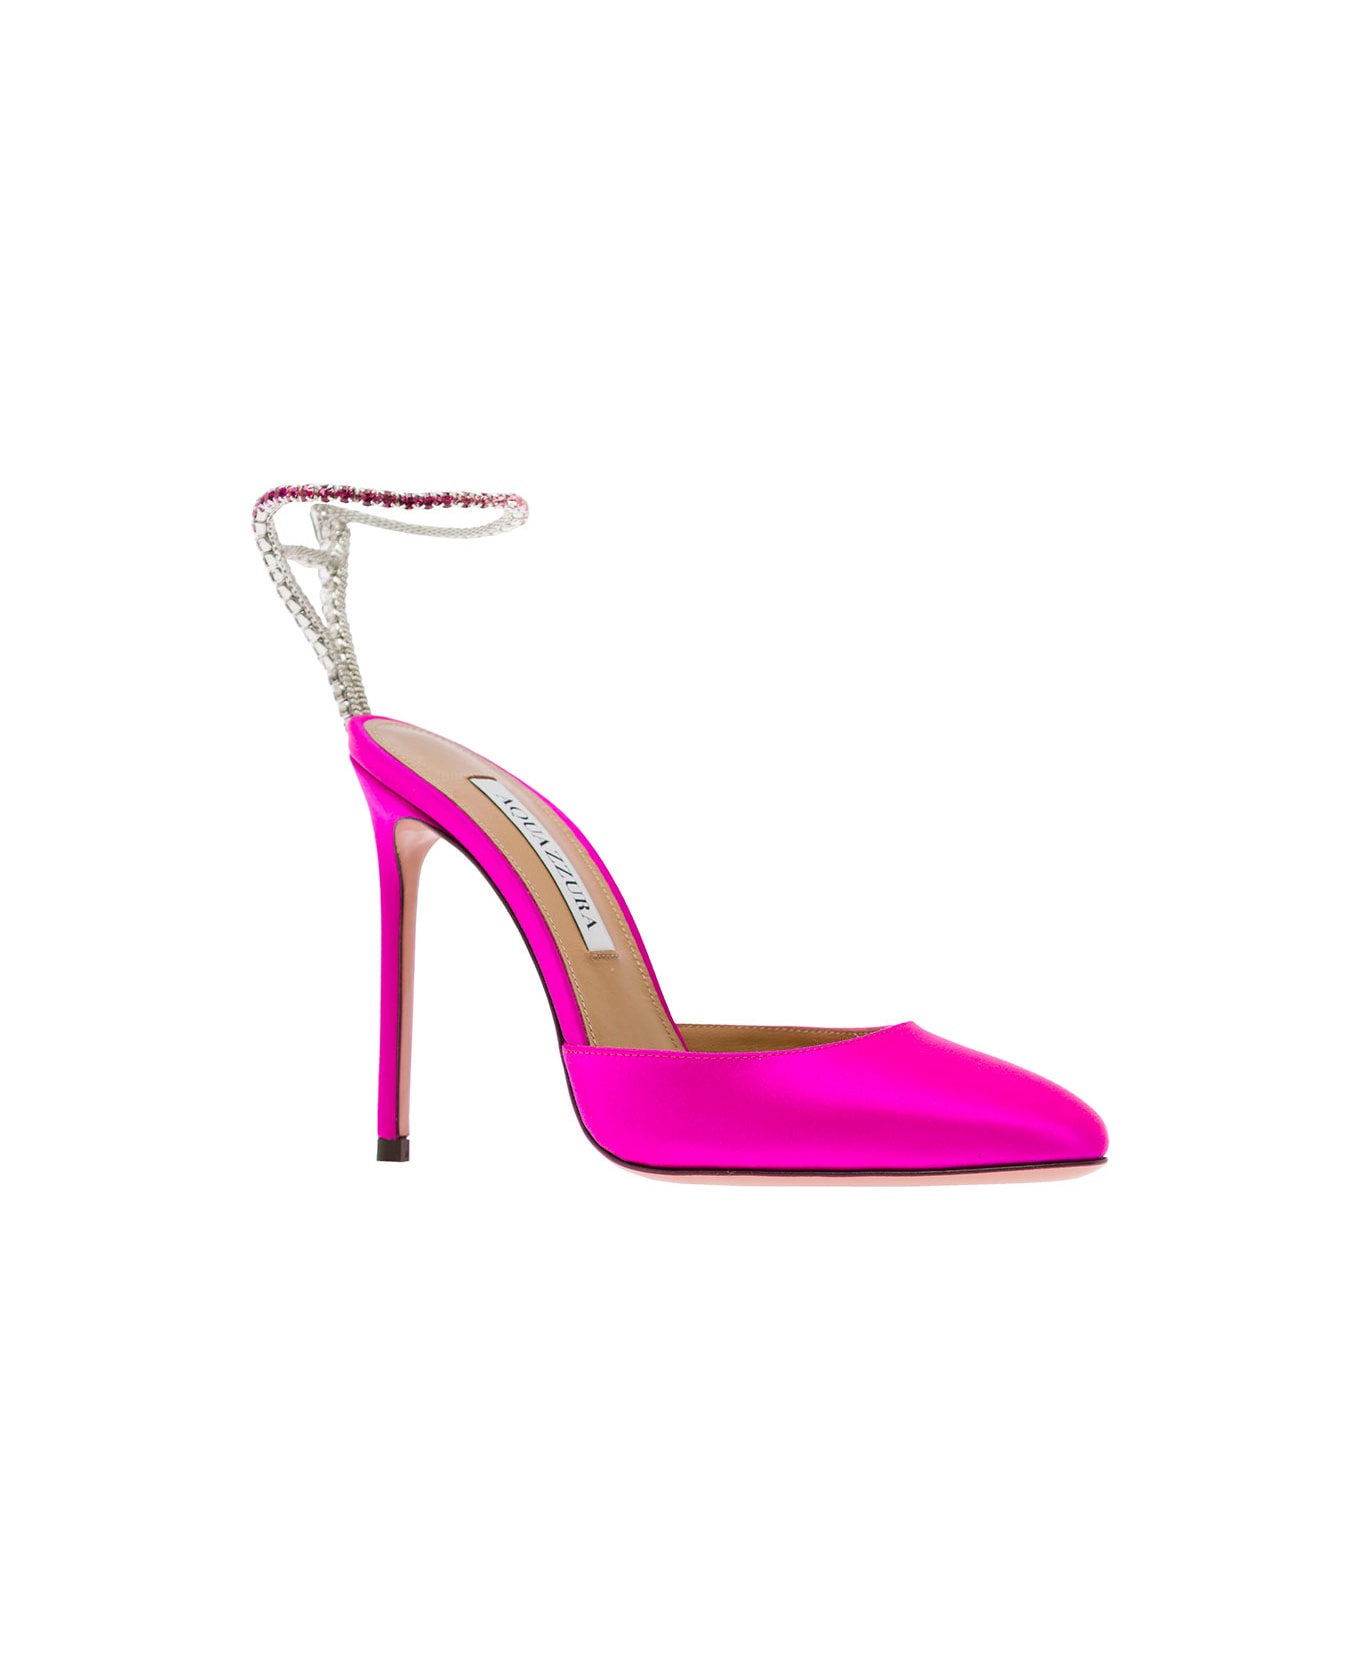 Aquazzura Fuchsia Pink 'ice' Pumps Satin Effect With Crystal Embellishment In Leather Woman - Fuxia